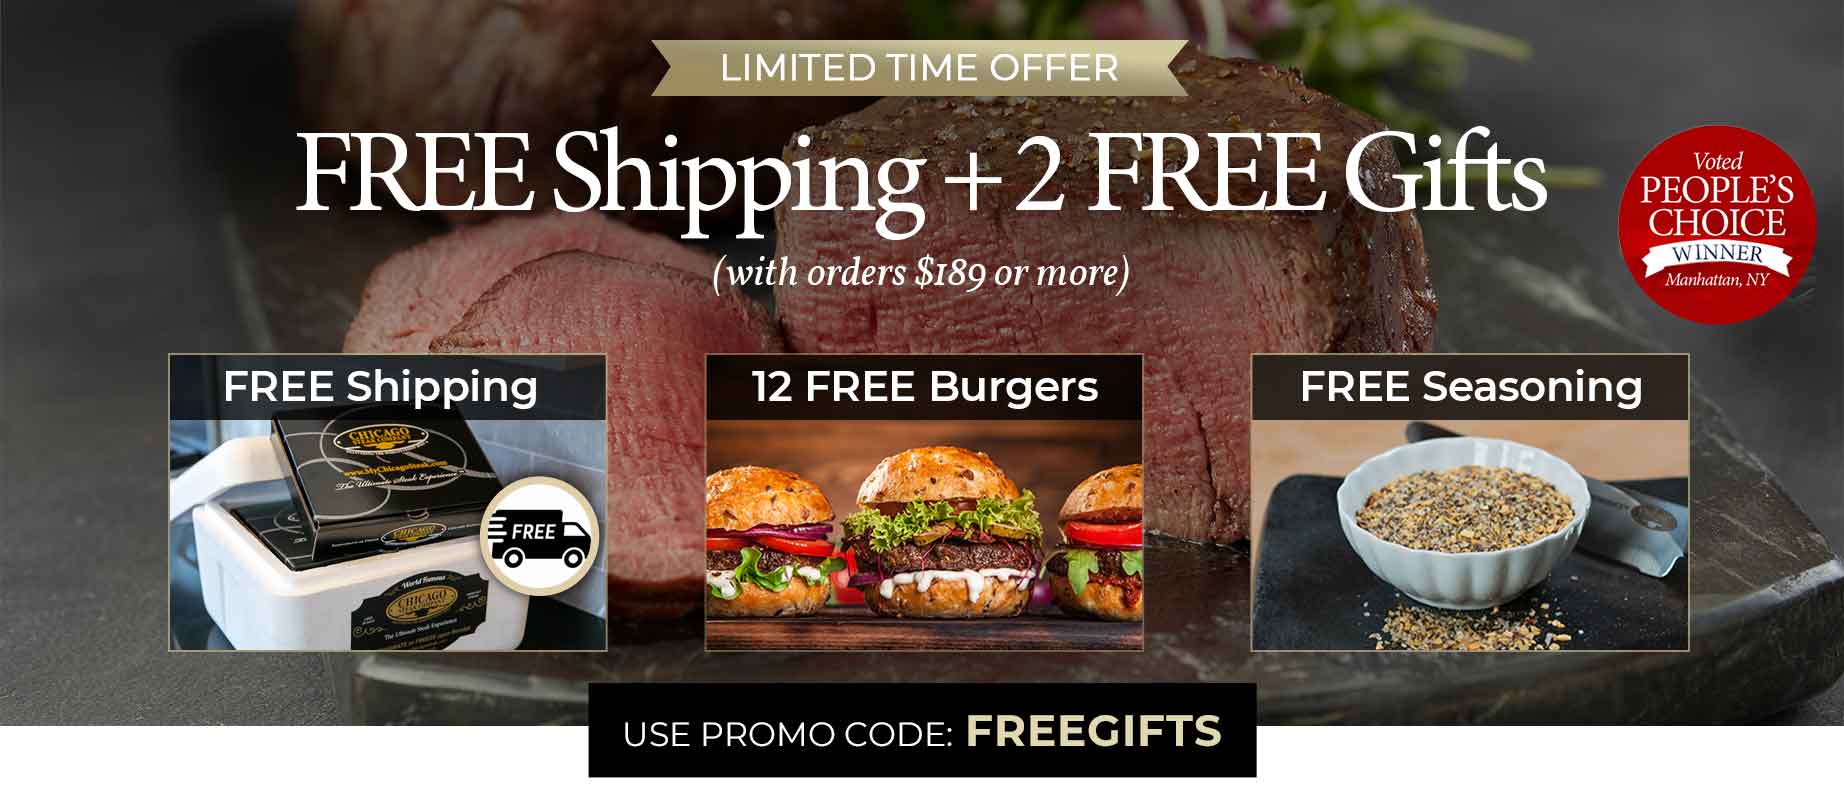  Exclusive Limited Time Offer -Free Shipping and 12 free burgers on orders $189+  Use Promo Code FREEGIFTS